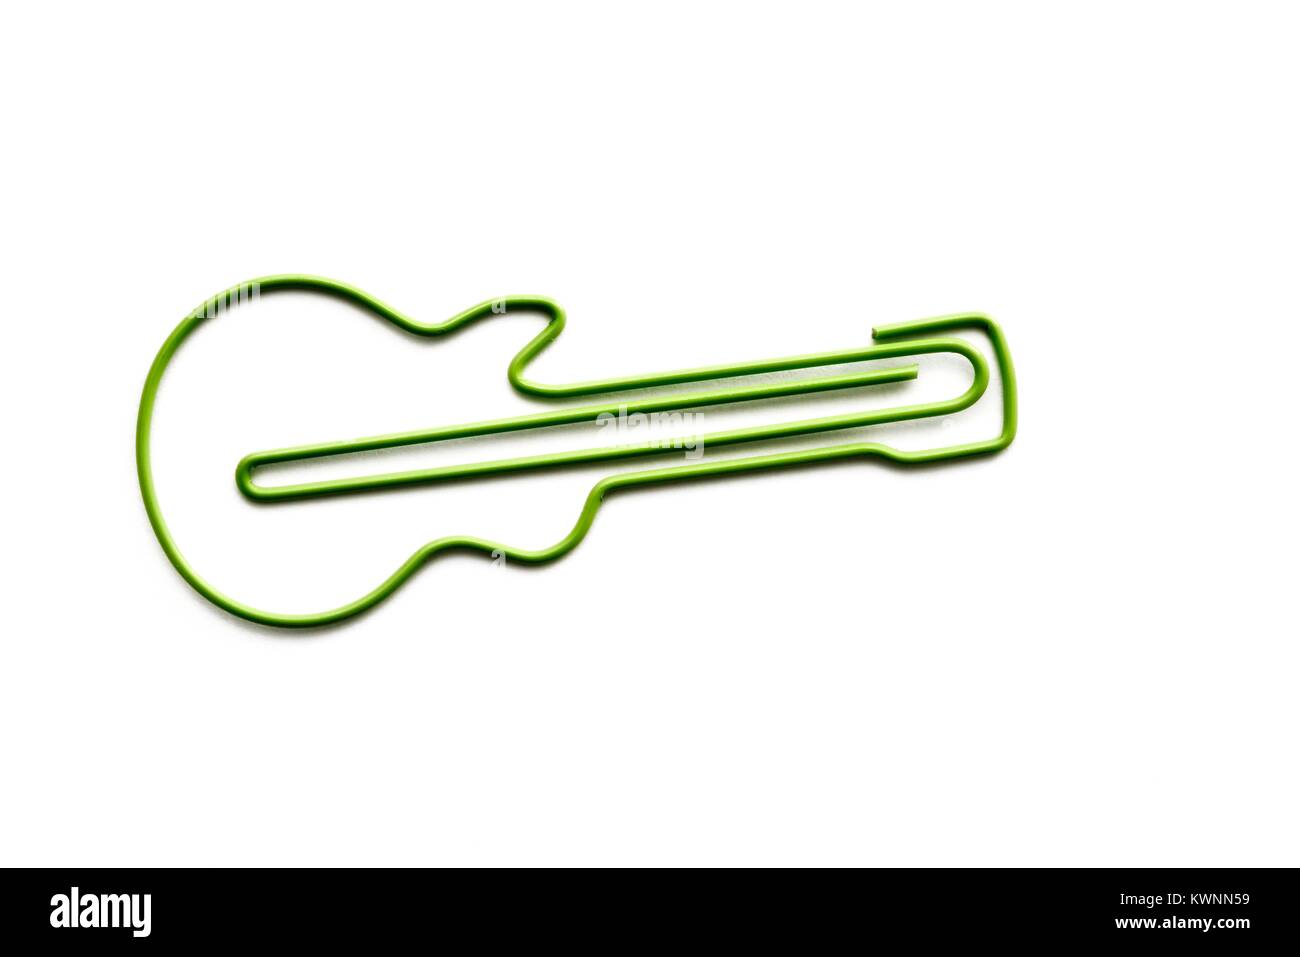 guitar shaped novelty paper clip Stock Photo